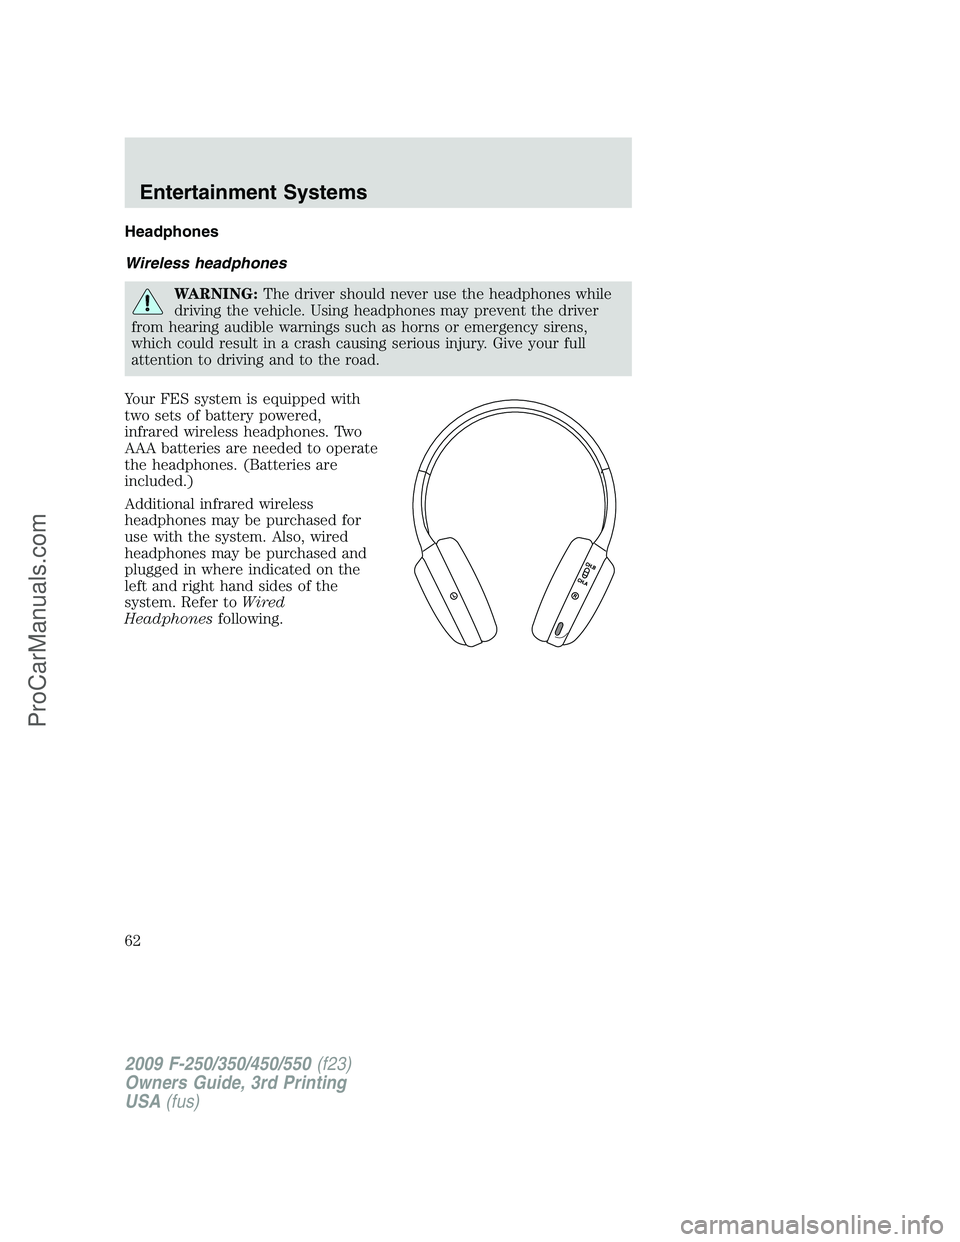 FORD F350 2009  Owners Manual Headphones
Wireless headphones
WARNING:The driver should never use the headphones while
driving the vehicle. Using headphones may prevent the driver
from hearing audible warnings such as horns or emer